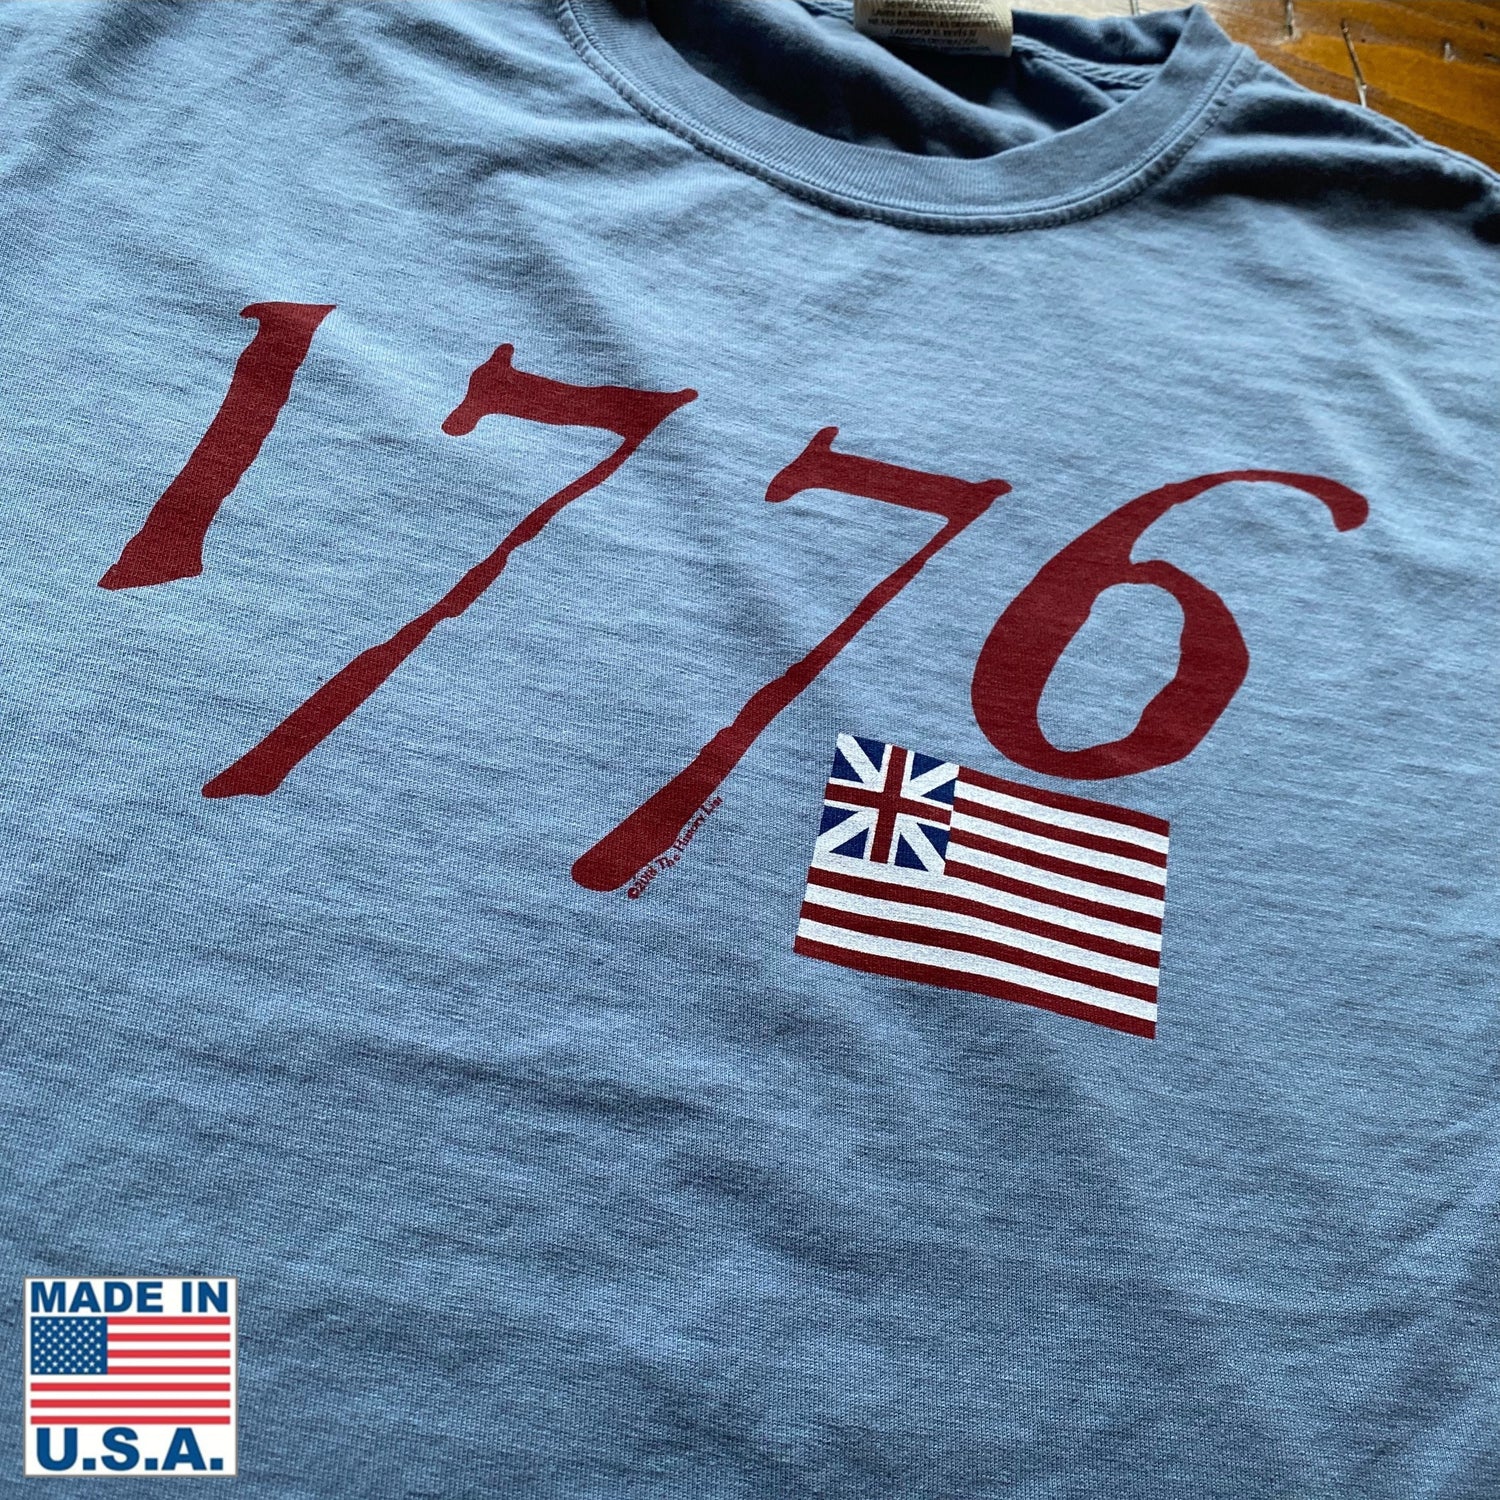 1776 — We hold these truths